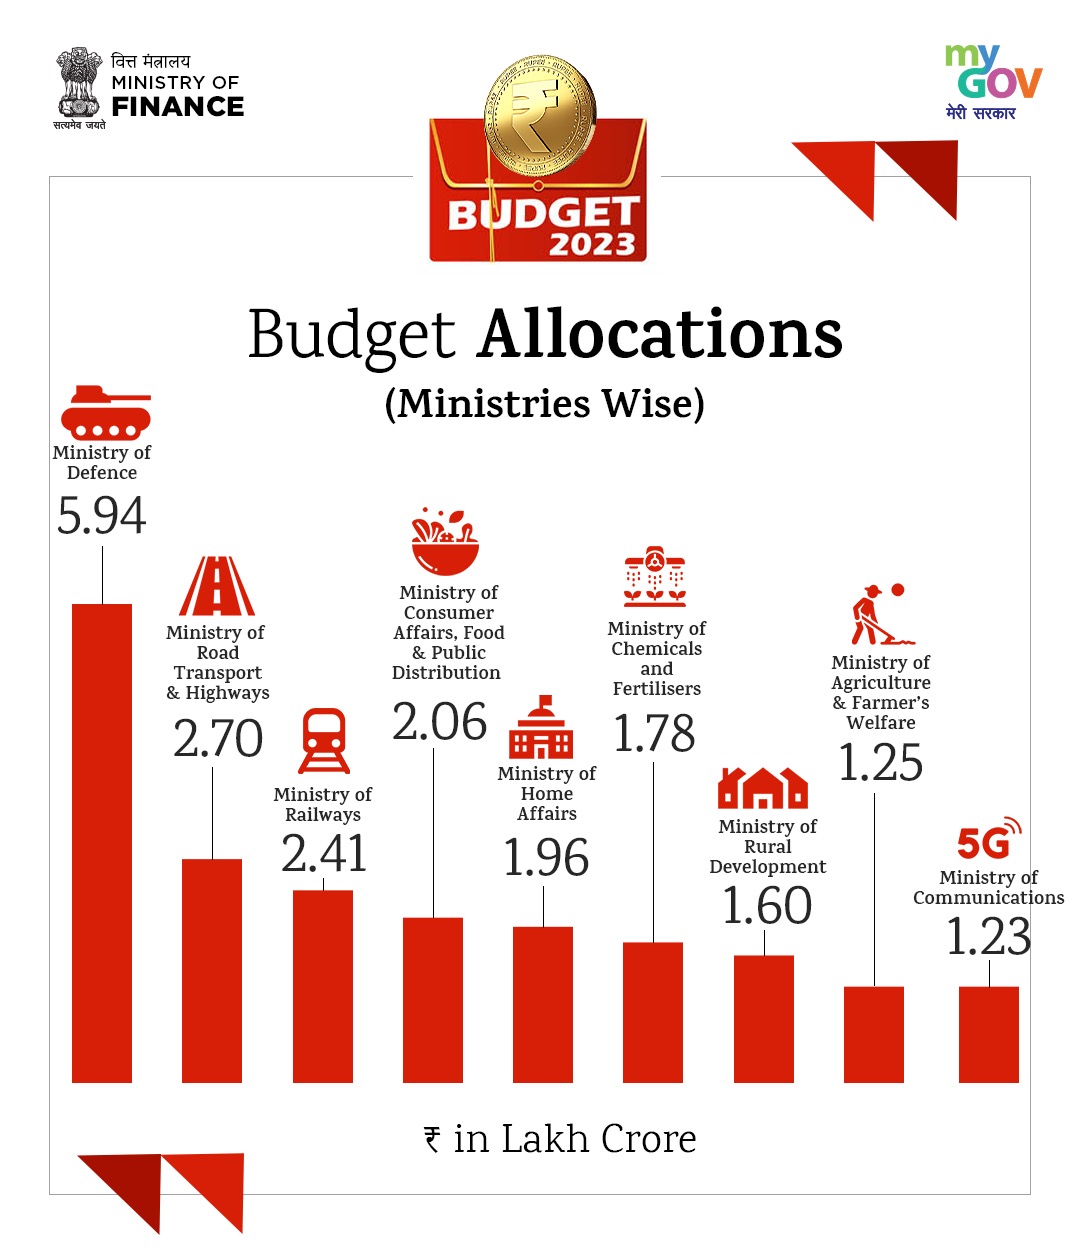 Image Union Budget 2023 Allocations Ministries wise